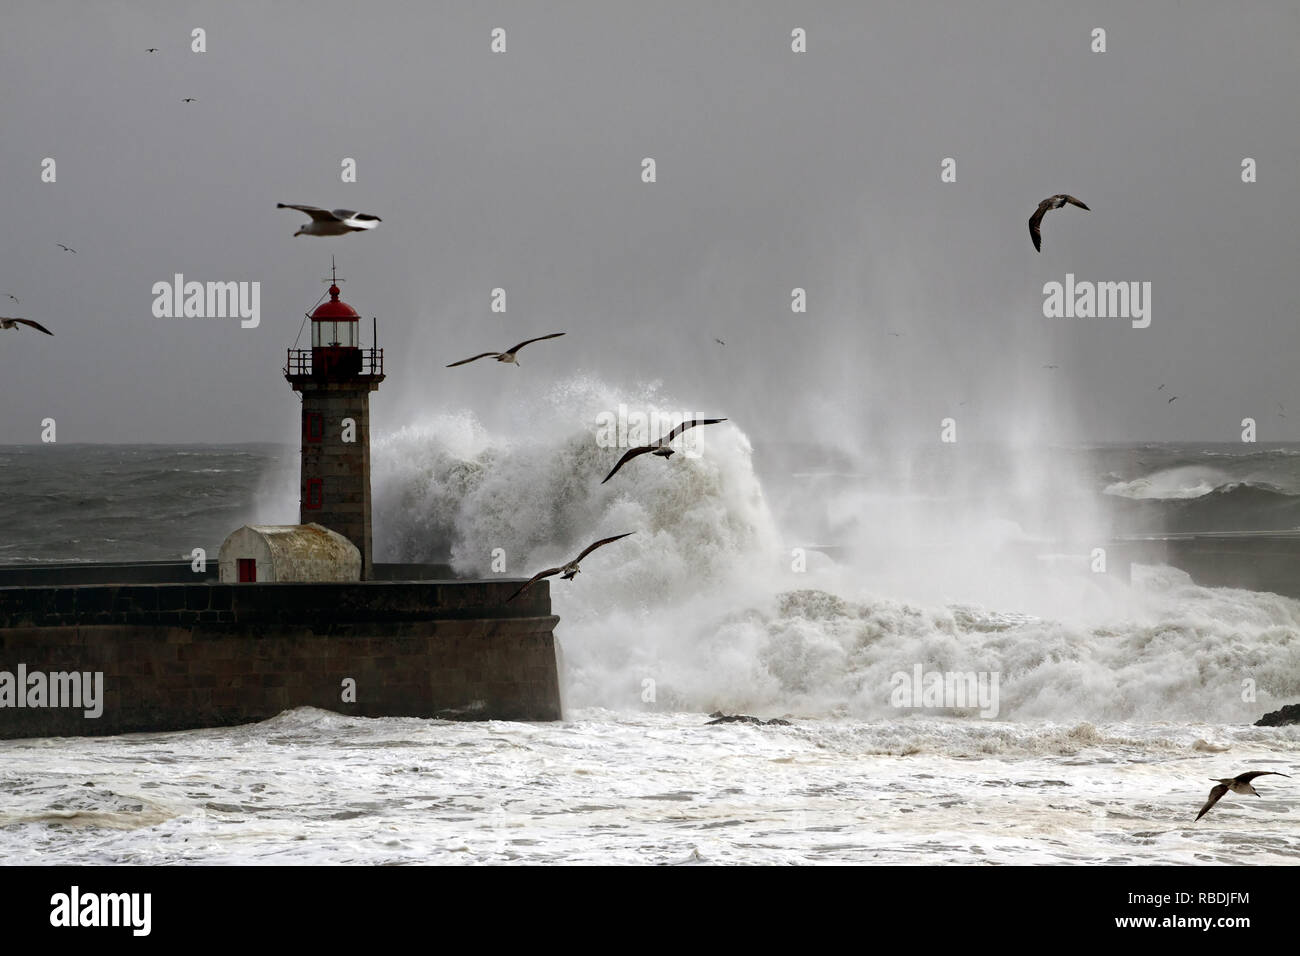 Storm with strong waves in the Portuguese coast Stock Photo